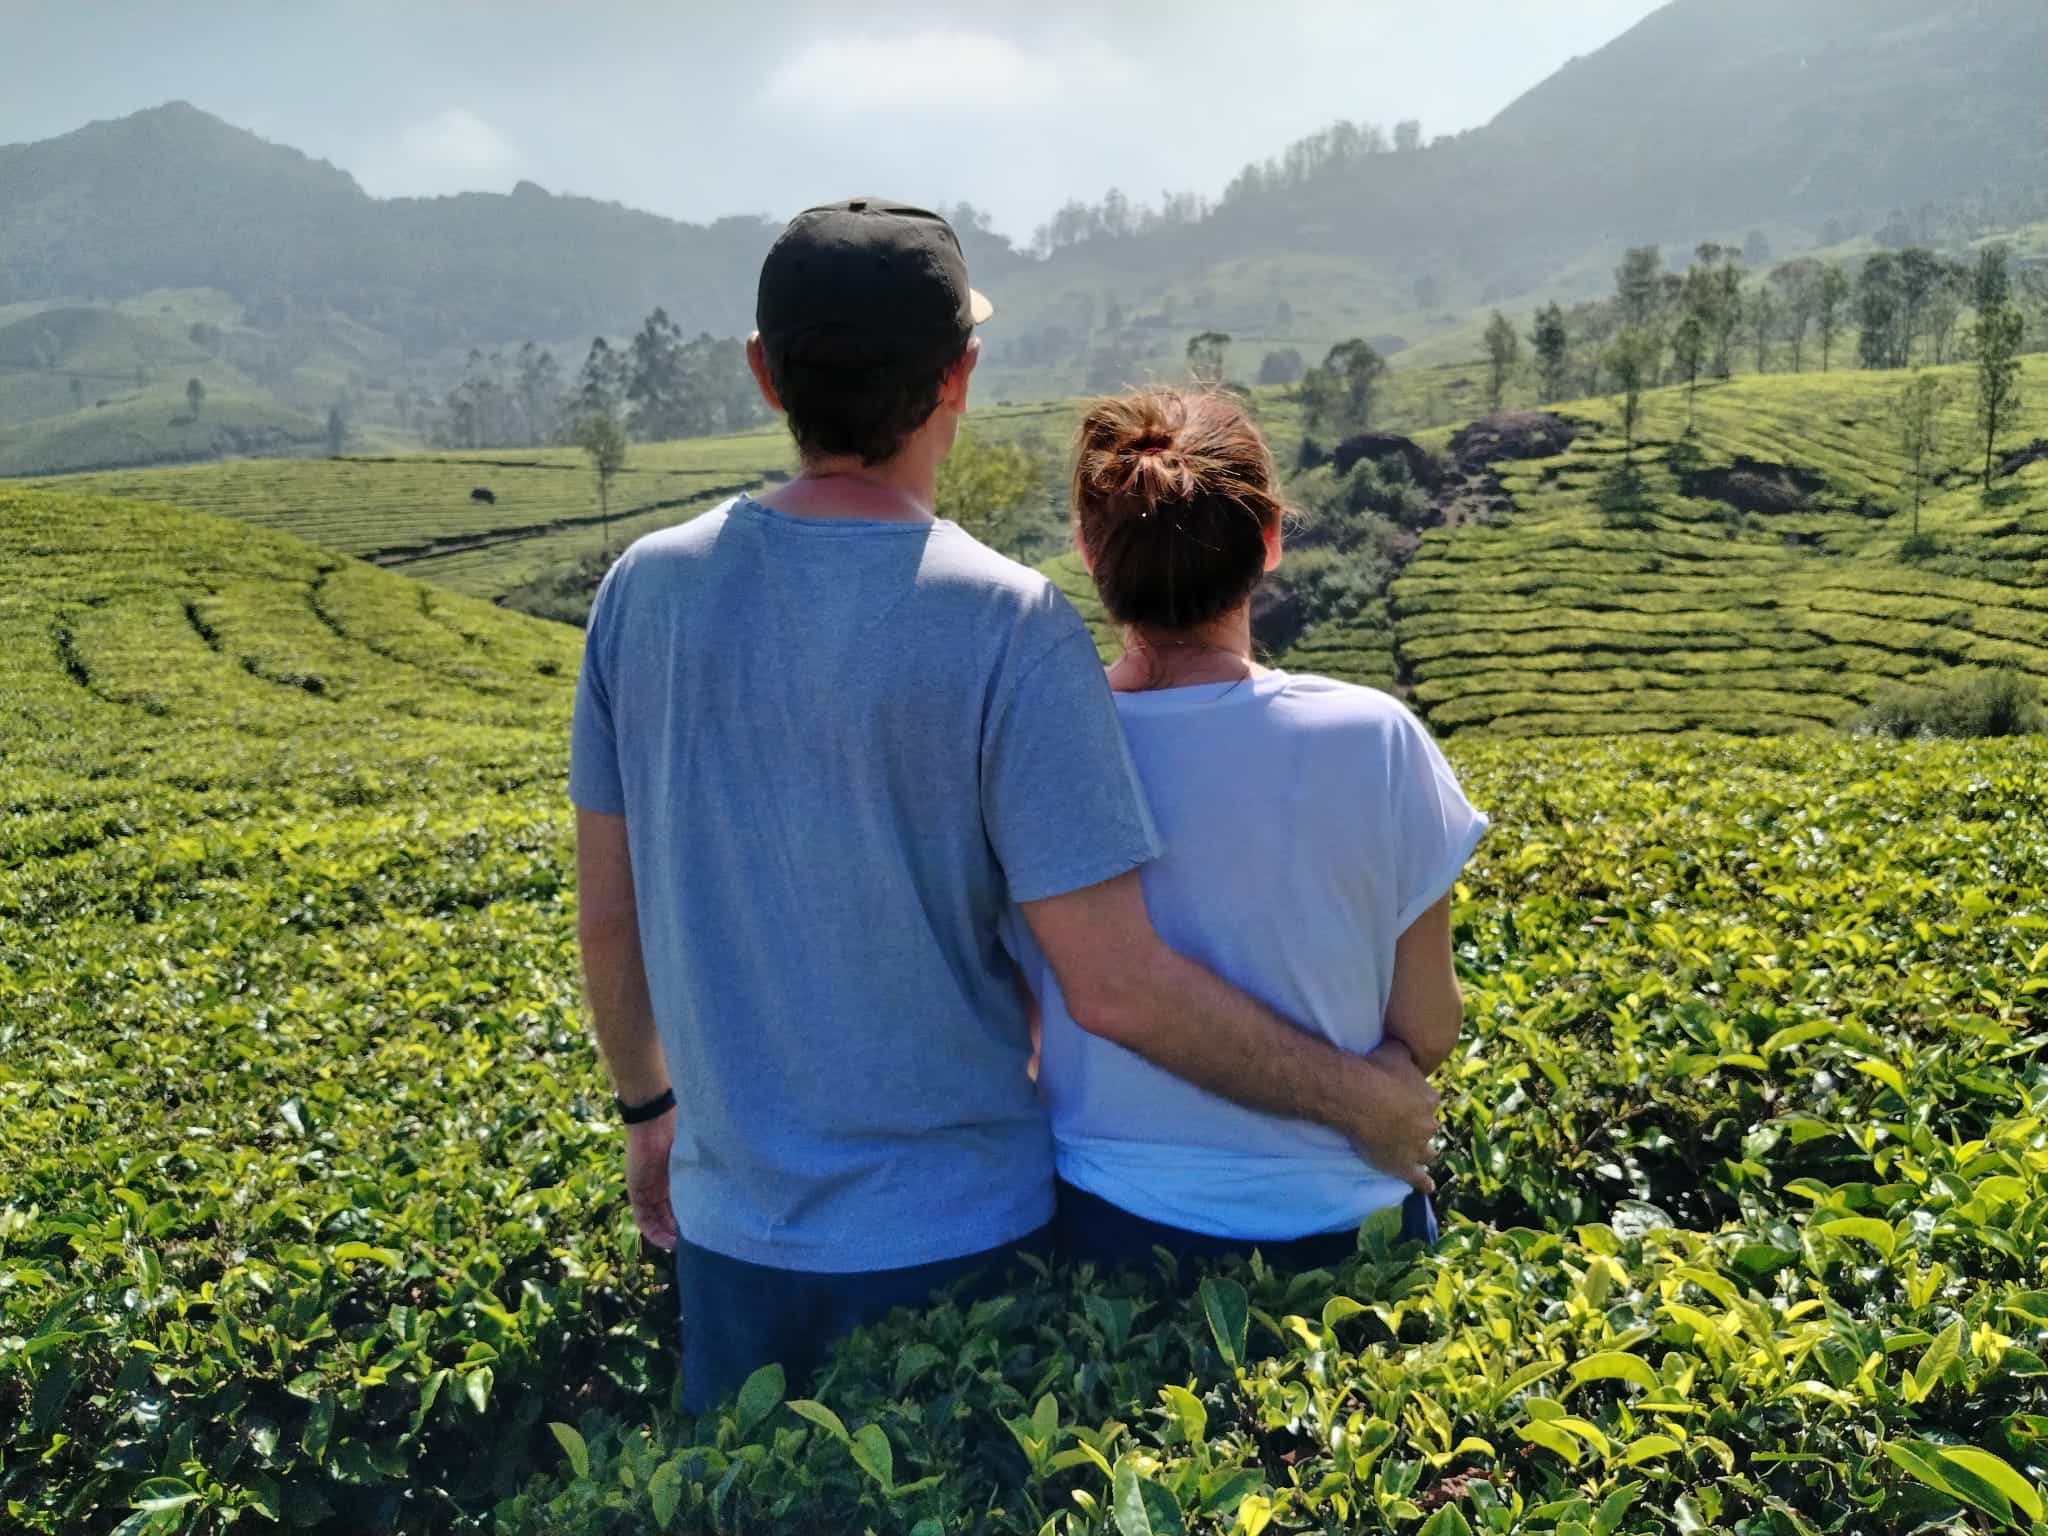 Us at the Lockhart Tea Fields in Munnar, India